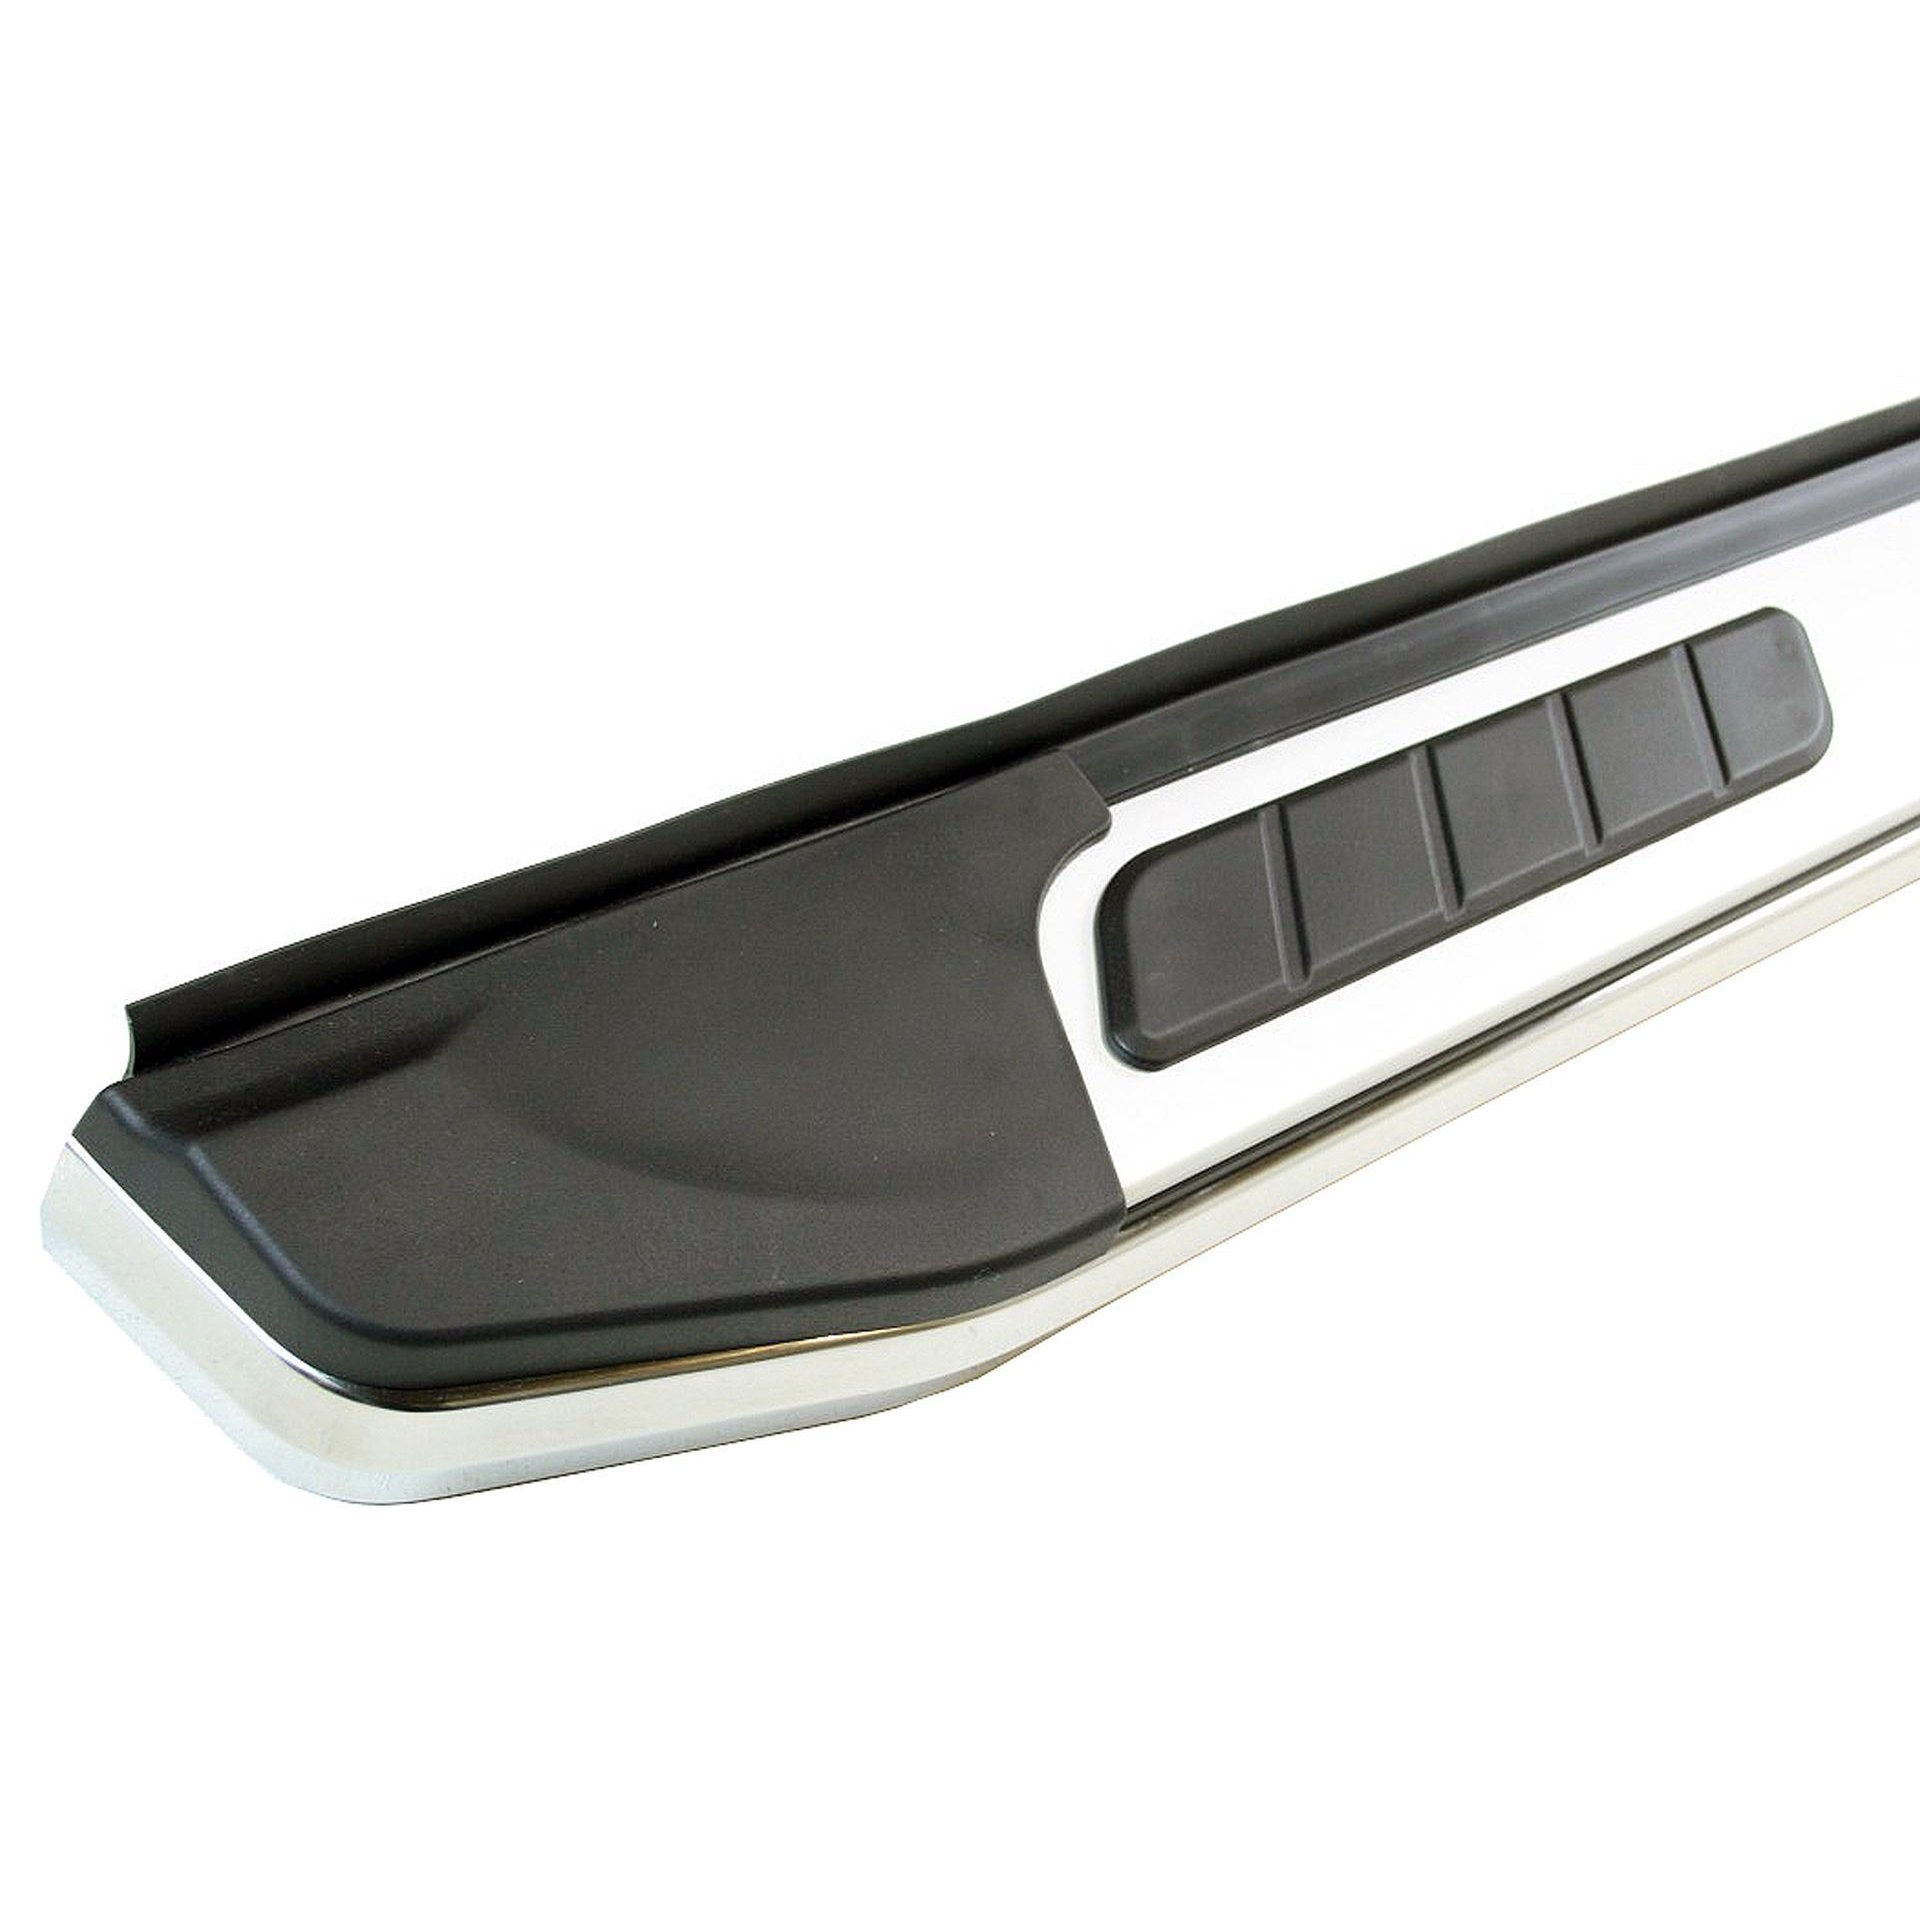 Suburban Side Steps Running Boards for Vauxhall Opel Mokka 2012-2019 -  - sold by Direct4x4